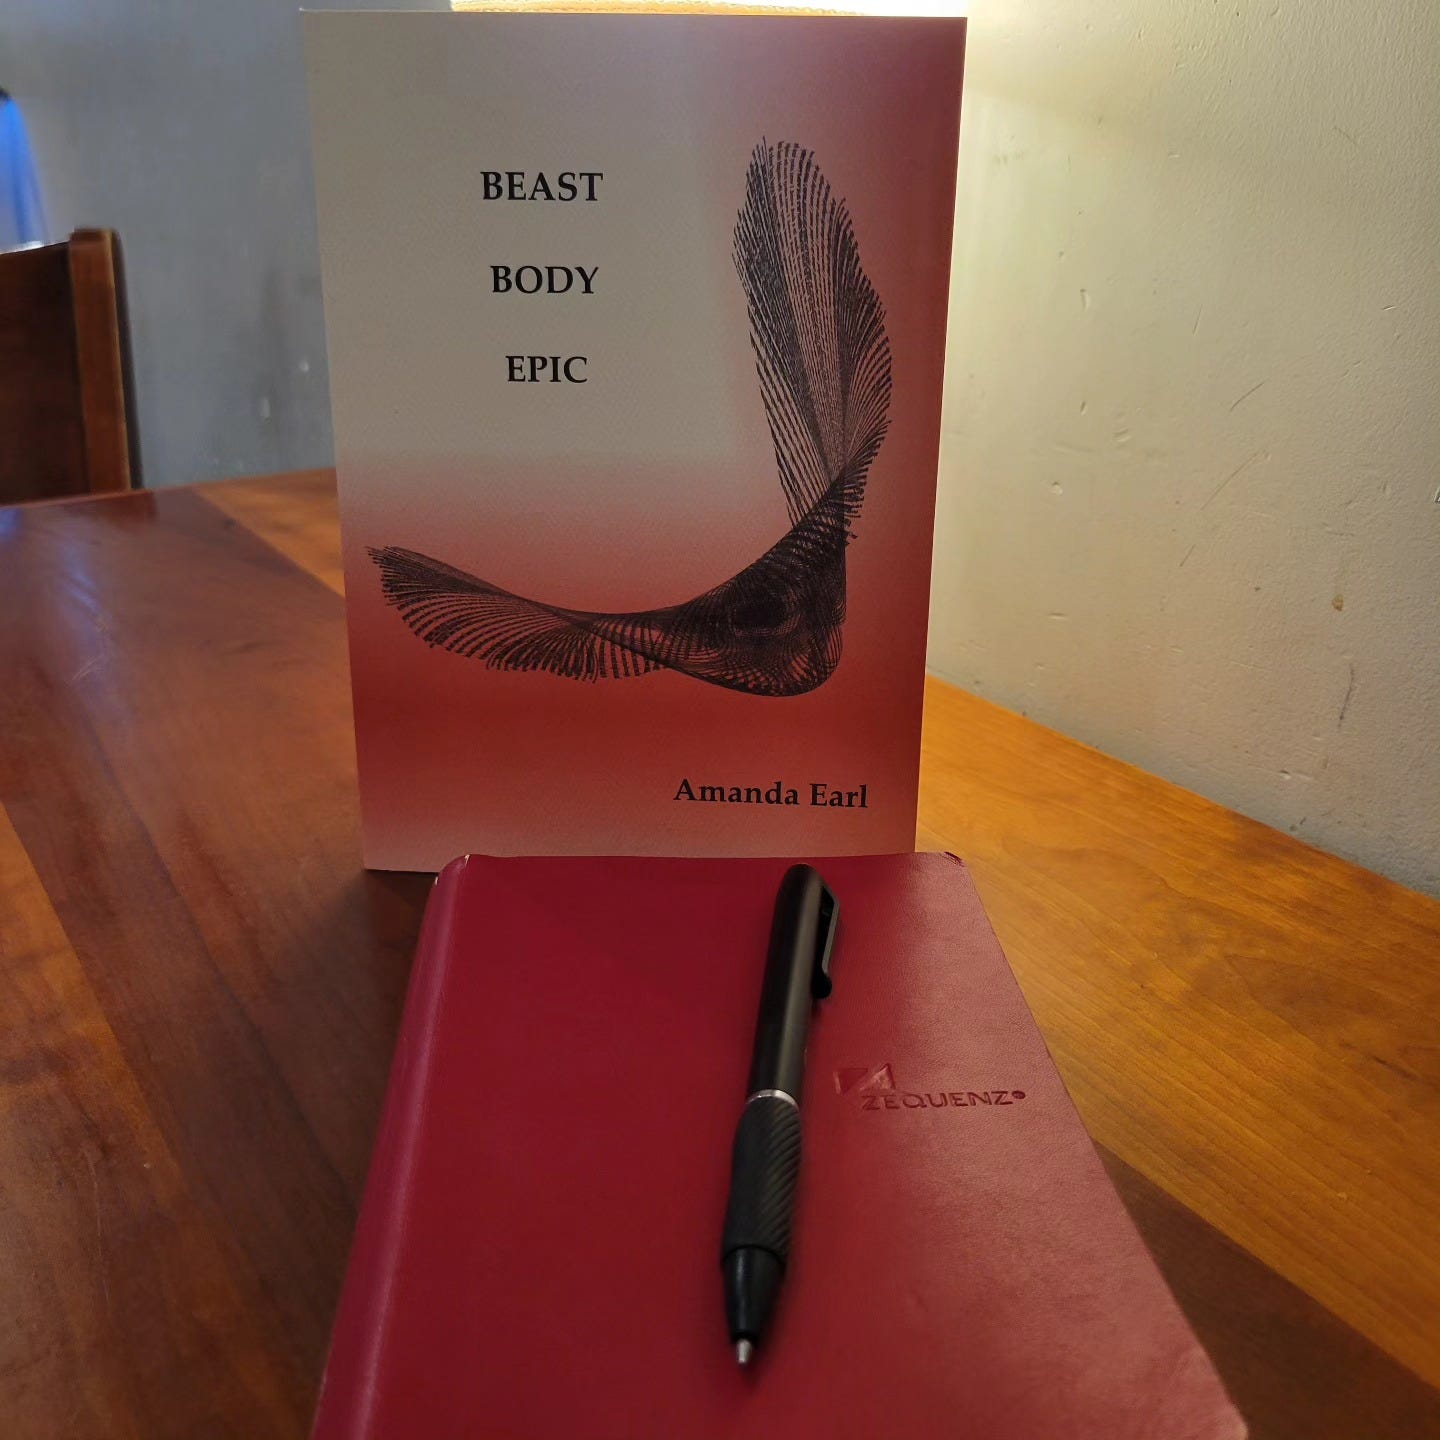 Book on a table with a red journal and a pen, background lighting.  TEXT on red and white book cover: Beast Body Epic/Amanda Earl; visual poem in centre of cover.